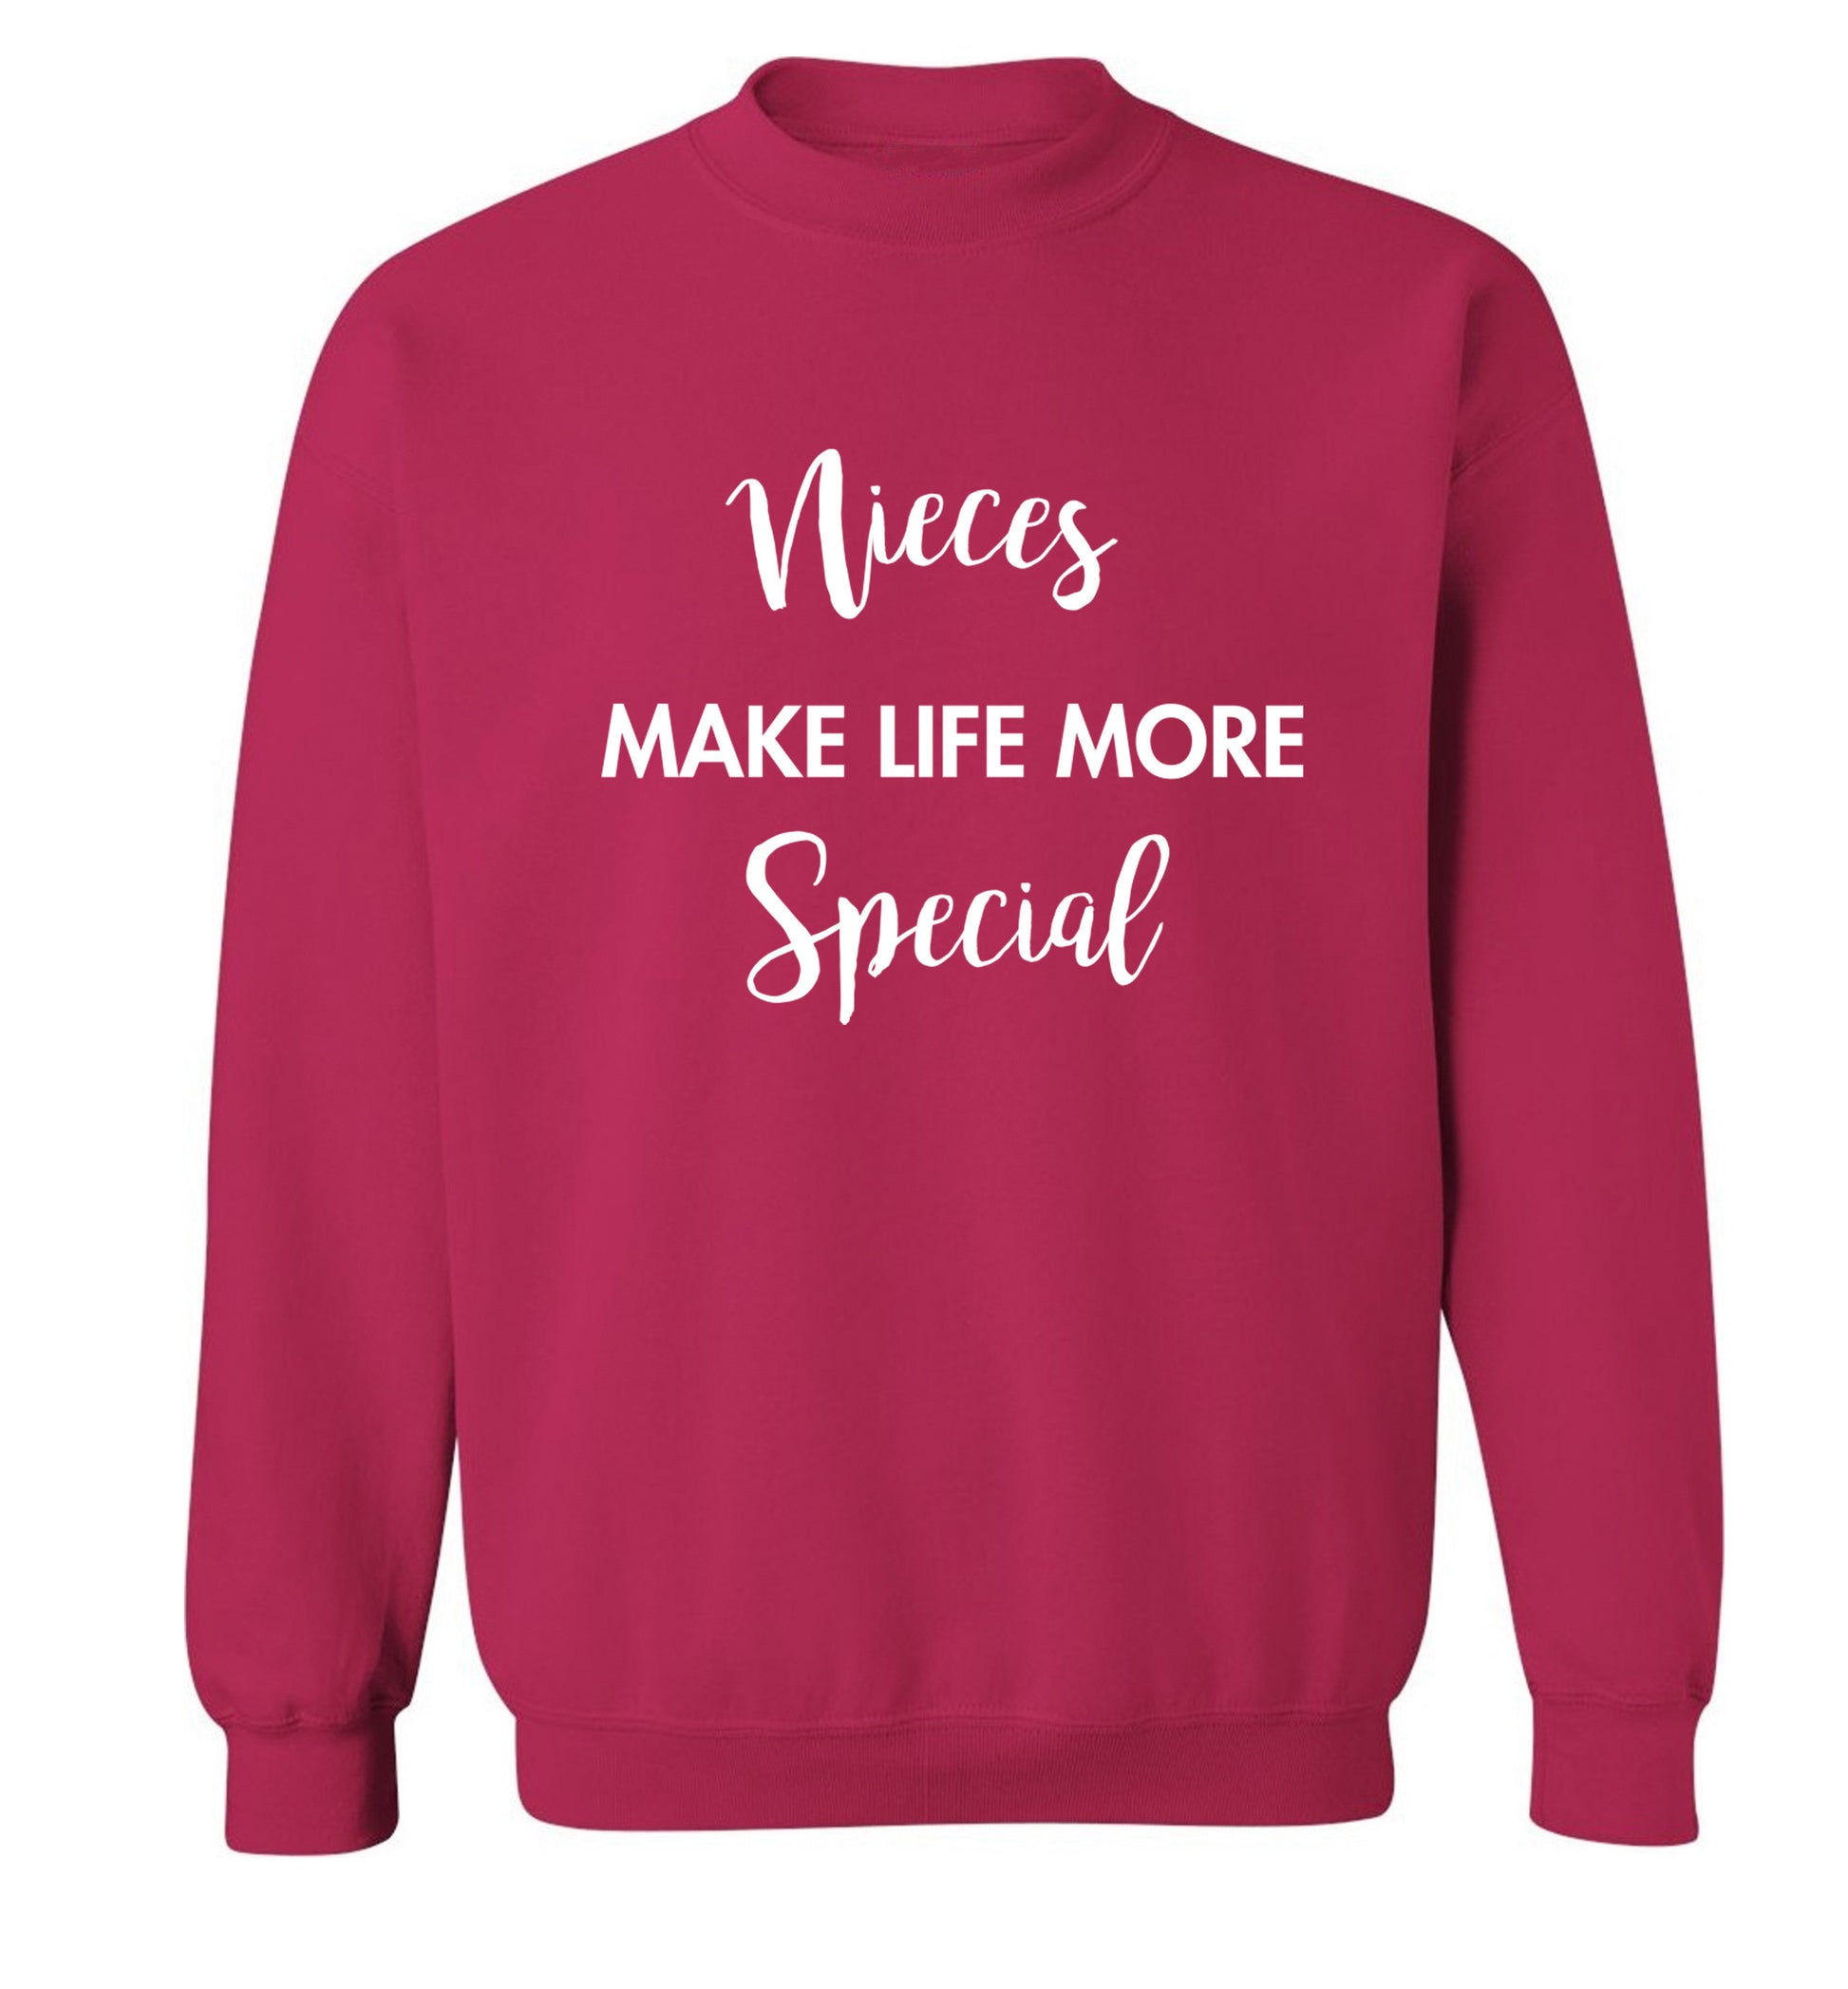 Nieces make life more special Adult's unisex pink Sweater 2XL